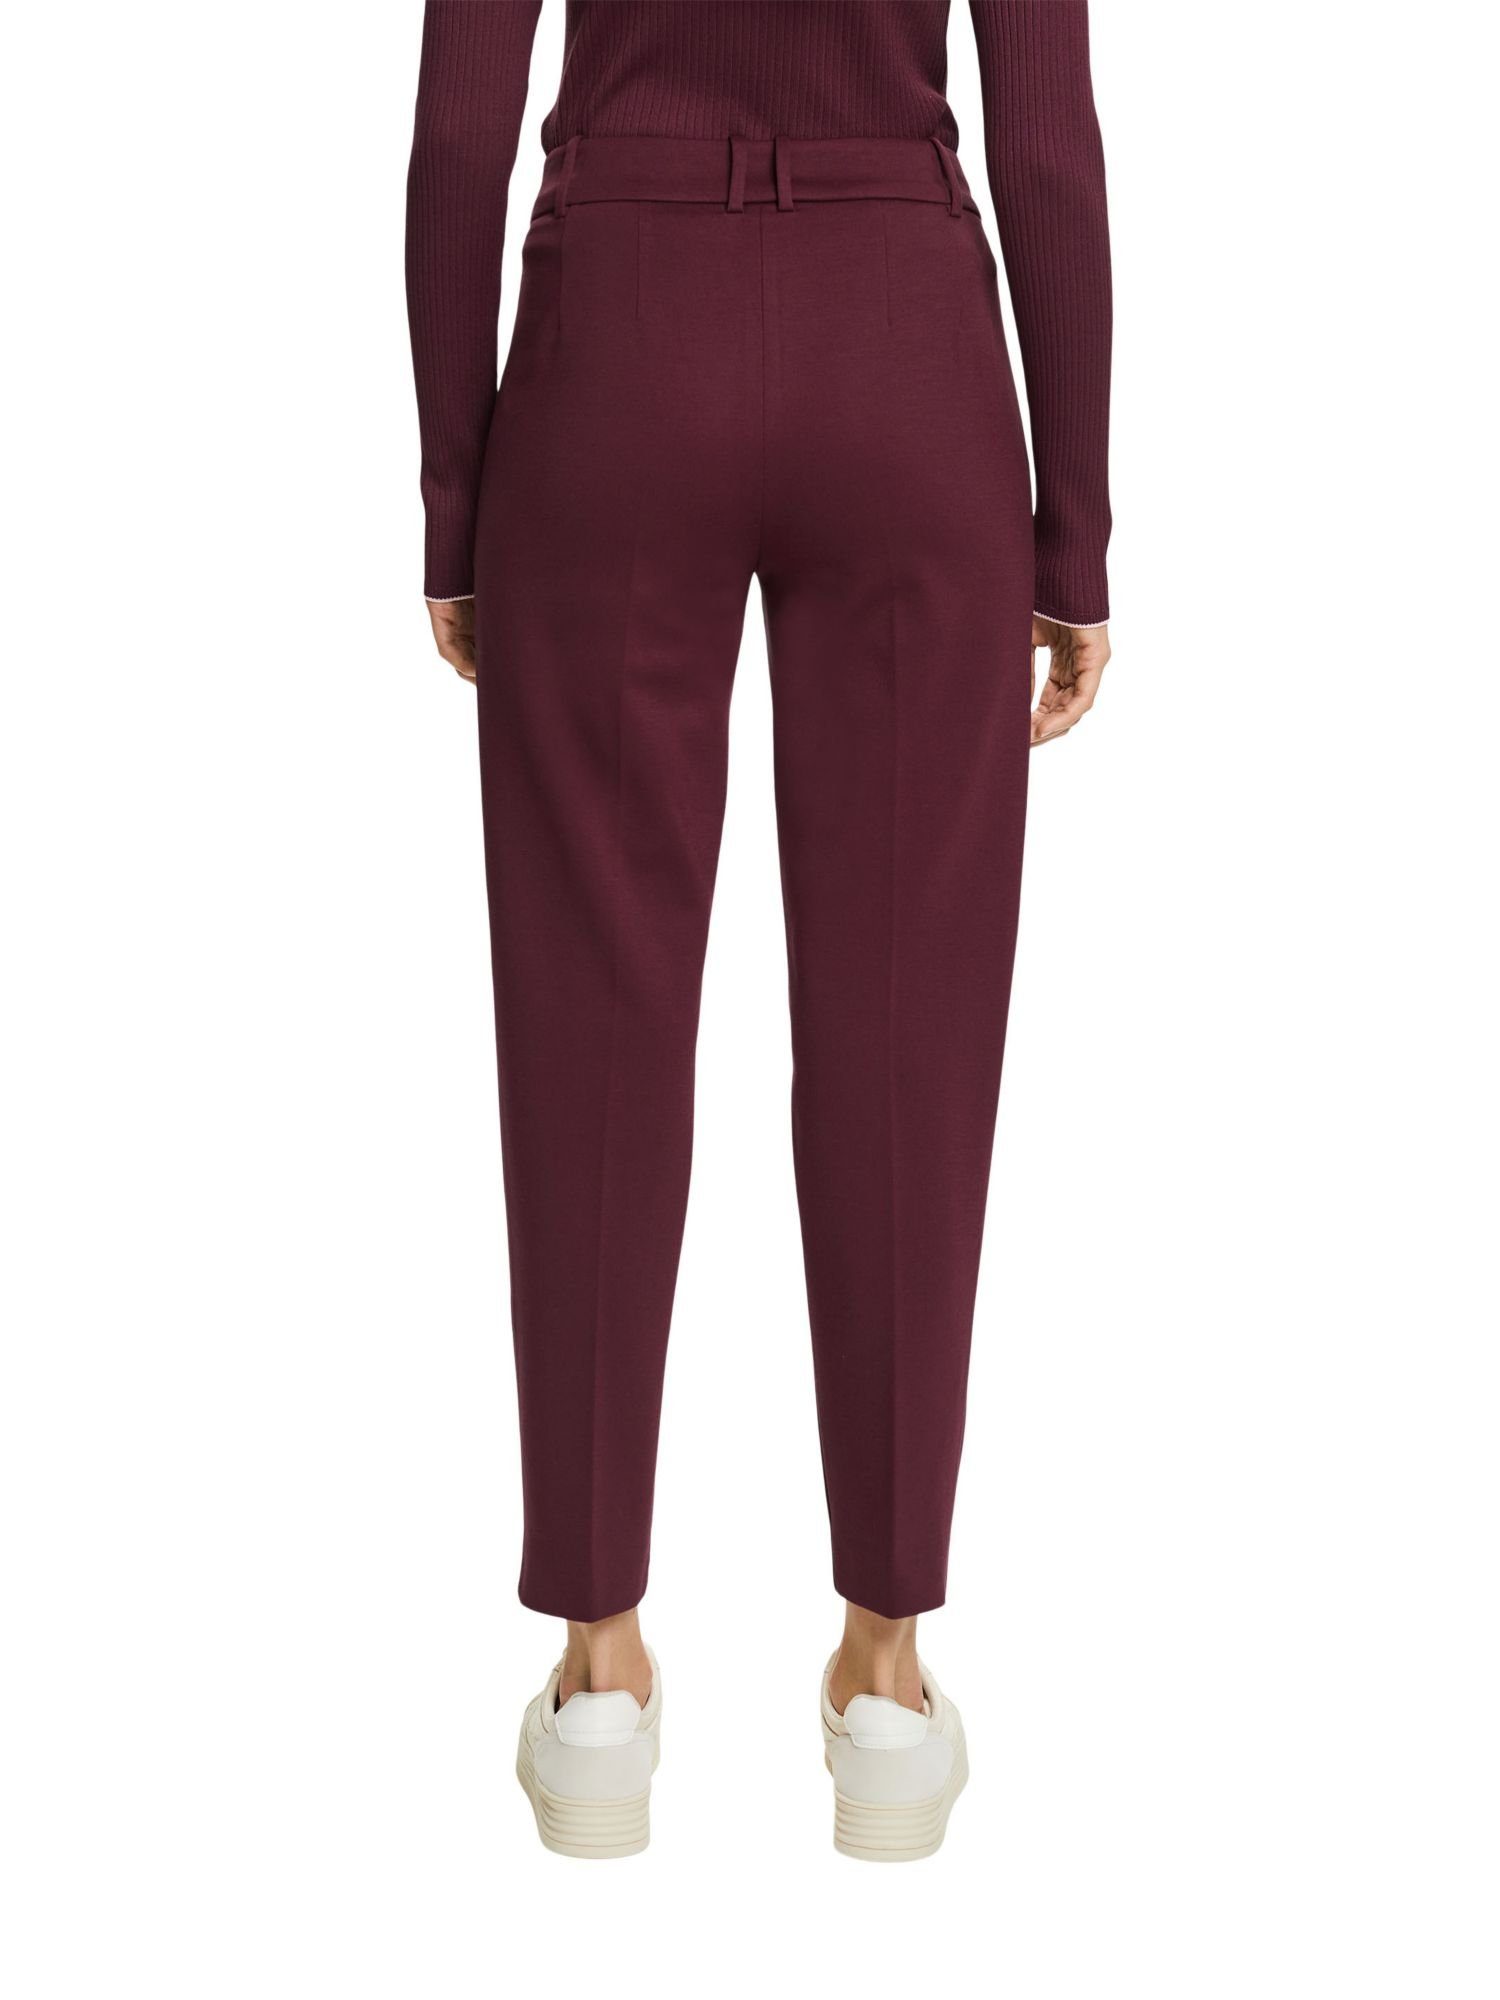 Esprit AUBERGINE Mix Pants PUNTO Tapered Match Stretch-Hose & Collection SPORTY